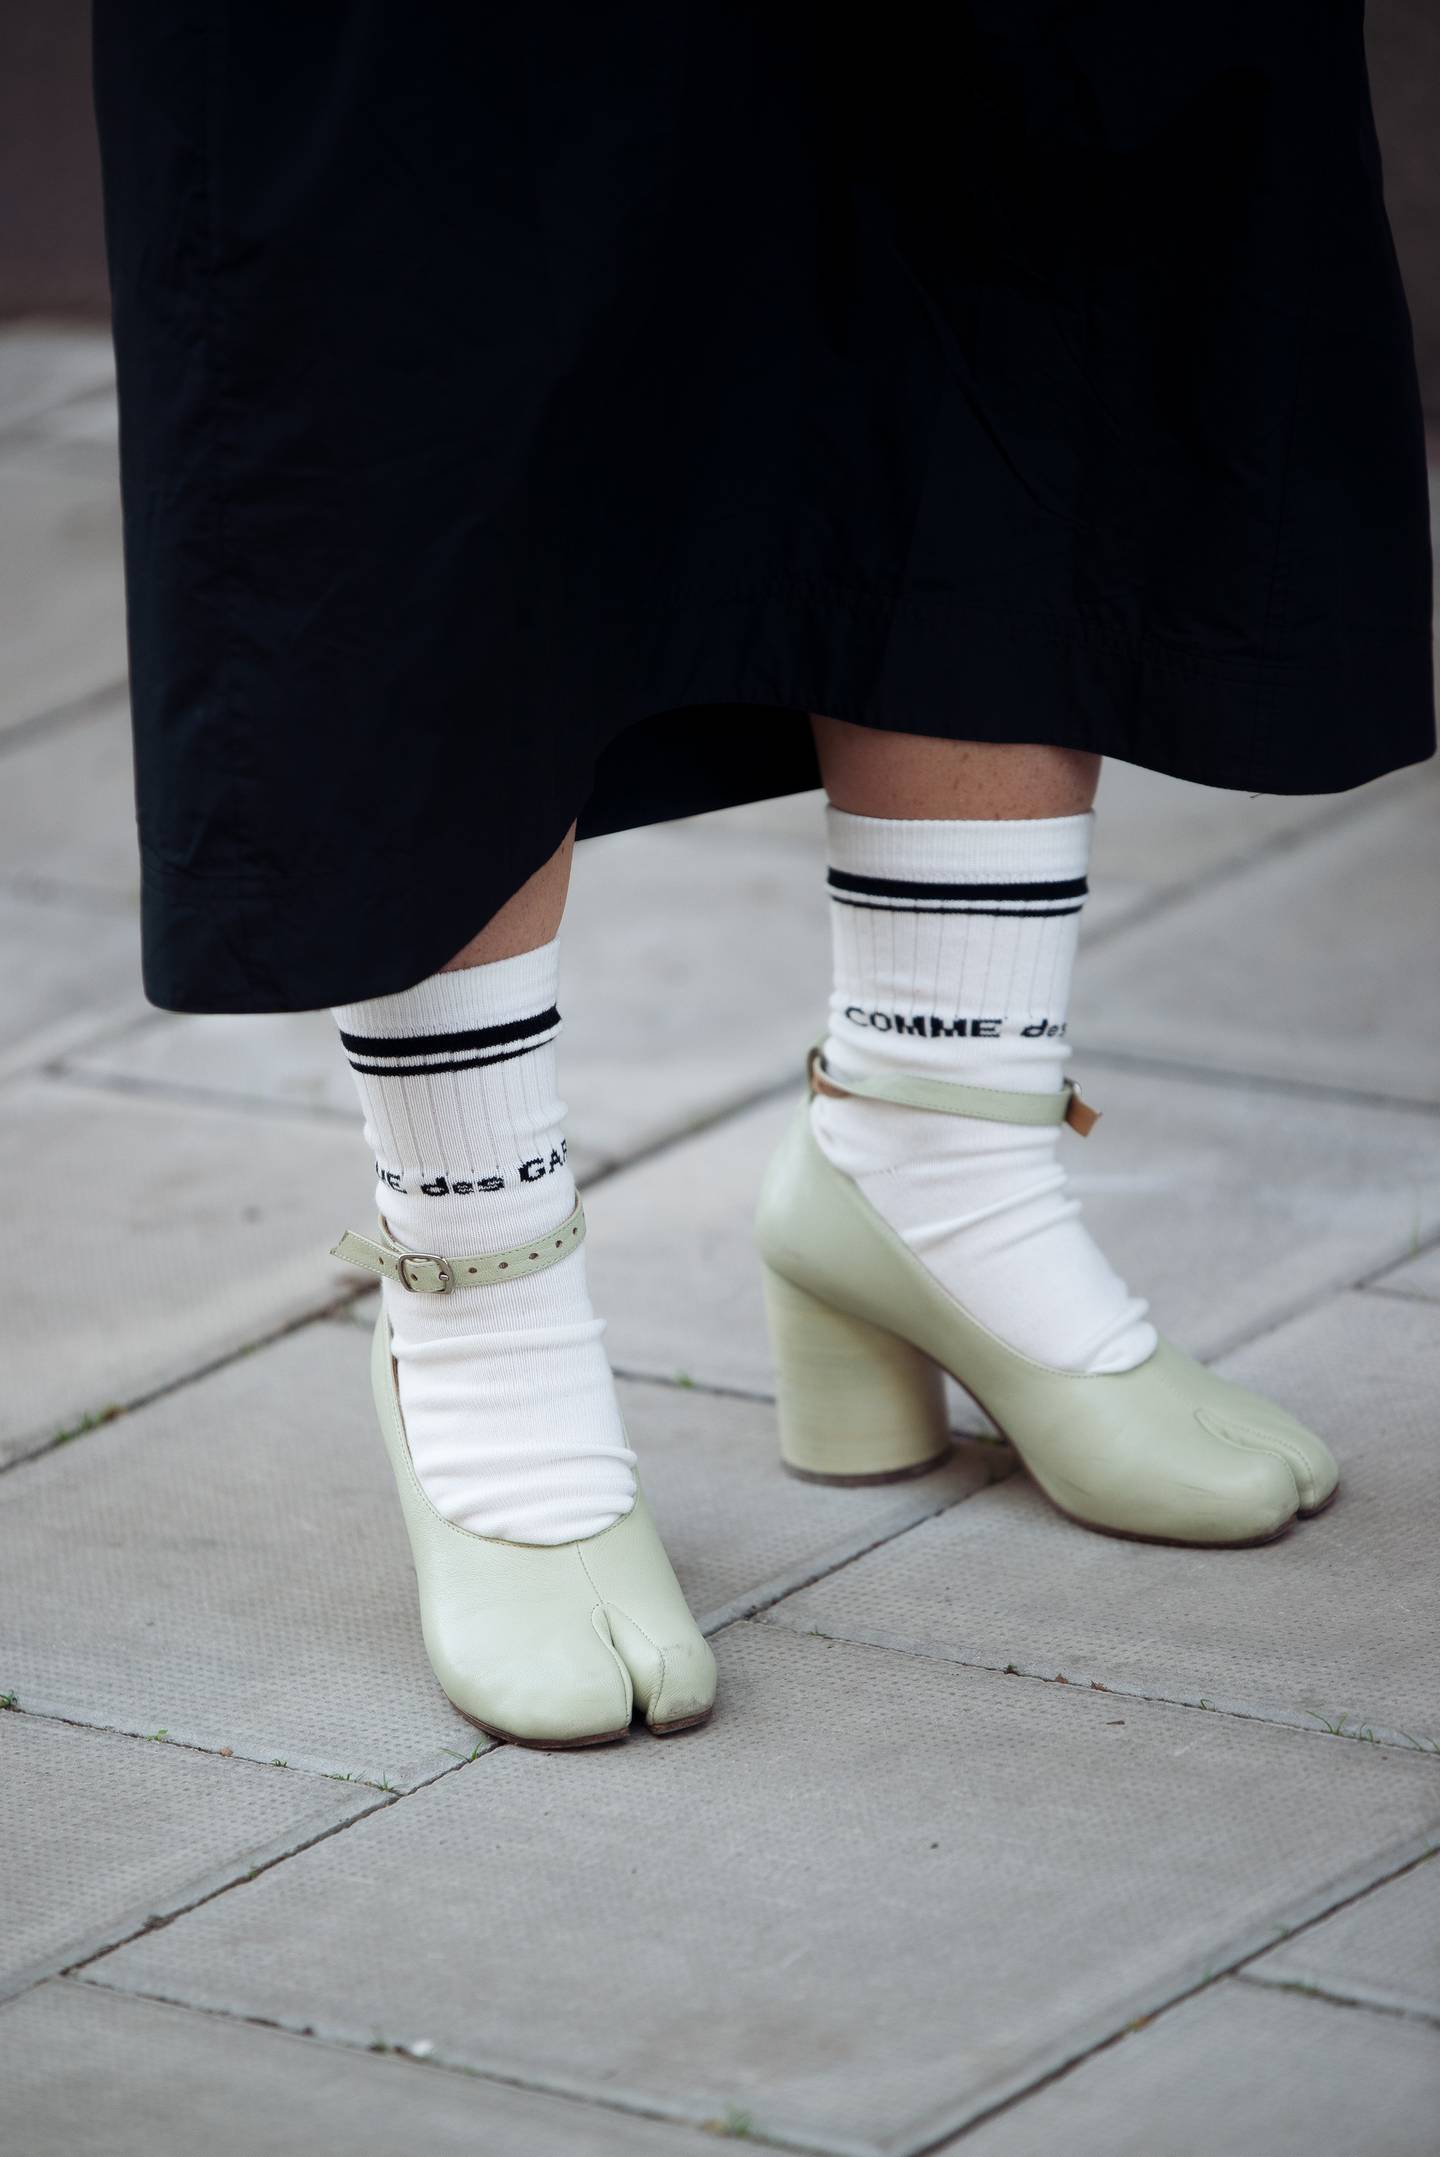 Maison Margiela's Tabi shoes have soared in popularity in recent years.